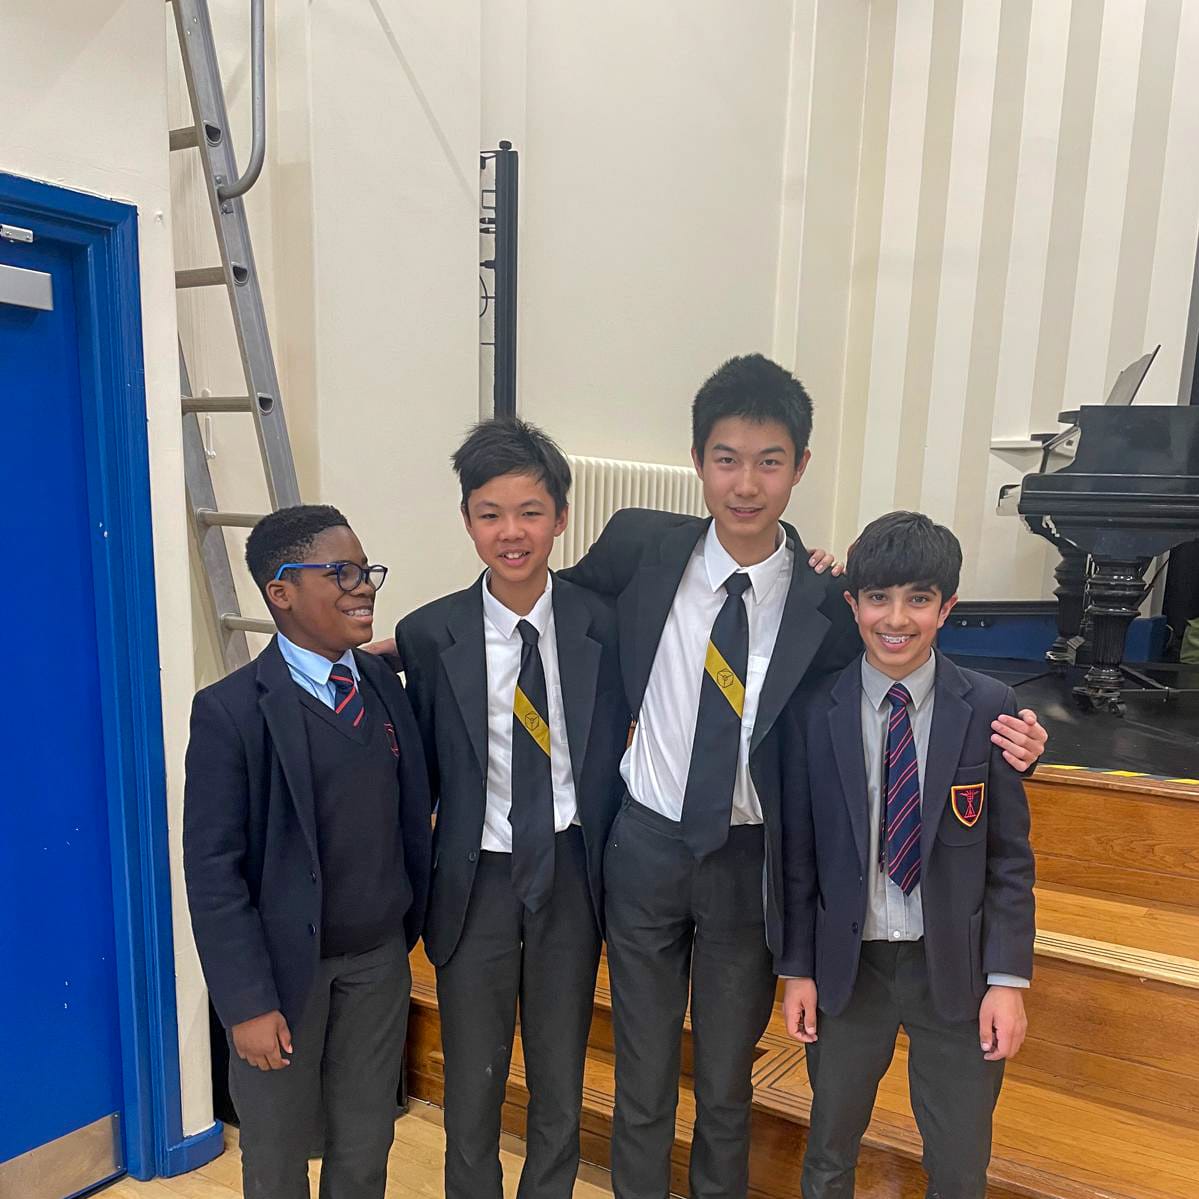 Tonbridge and @thenewbeacon recently joined forces to compete in the UKMT Team Maths challenge. First Years Andy and Noah worked well alongside Eli and Shabd from The New Beacon, and the boys finished as runners-up in the competition. Well done, all!